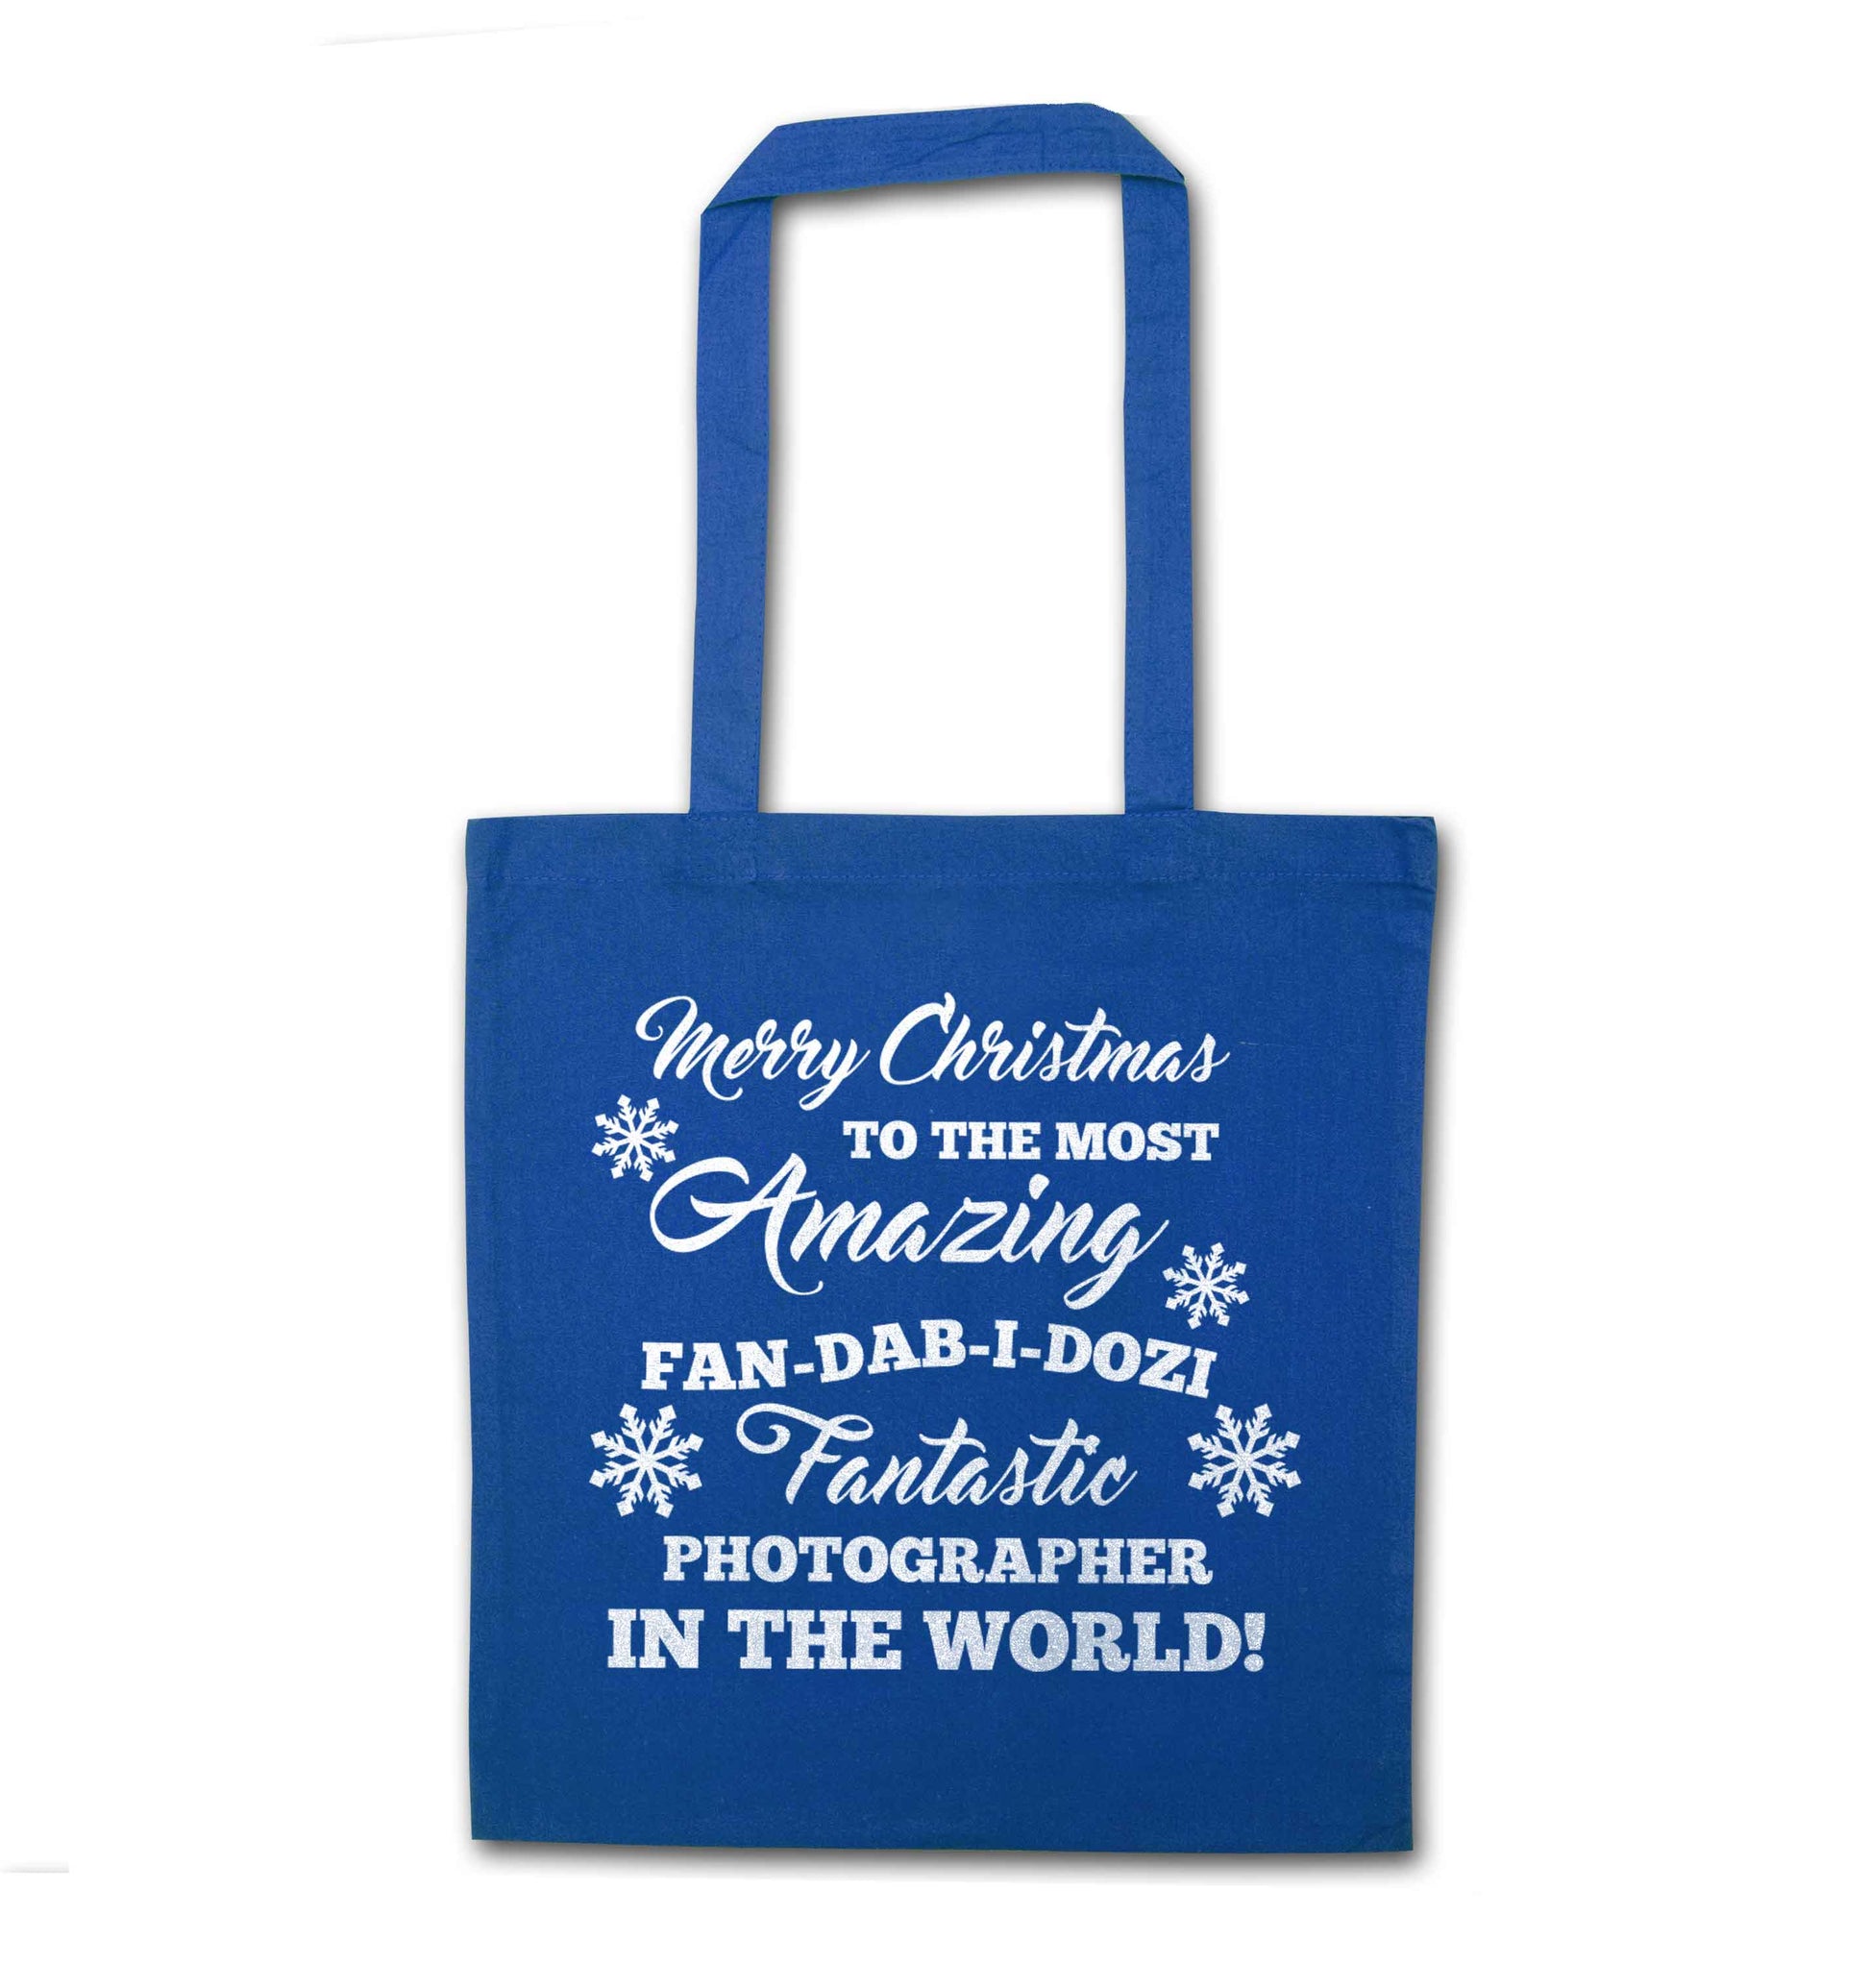 Merry Christmas to the most amazing fan-dab-i-dozi fantasic photographer in the world blue tote bag